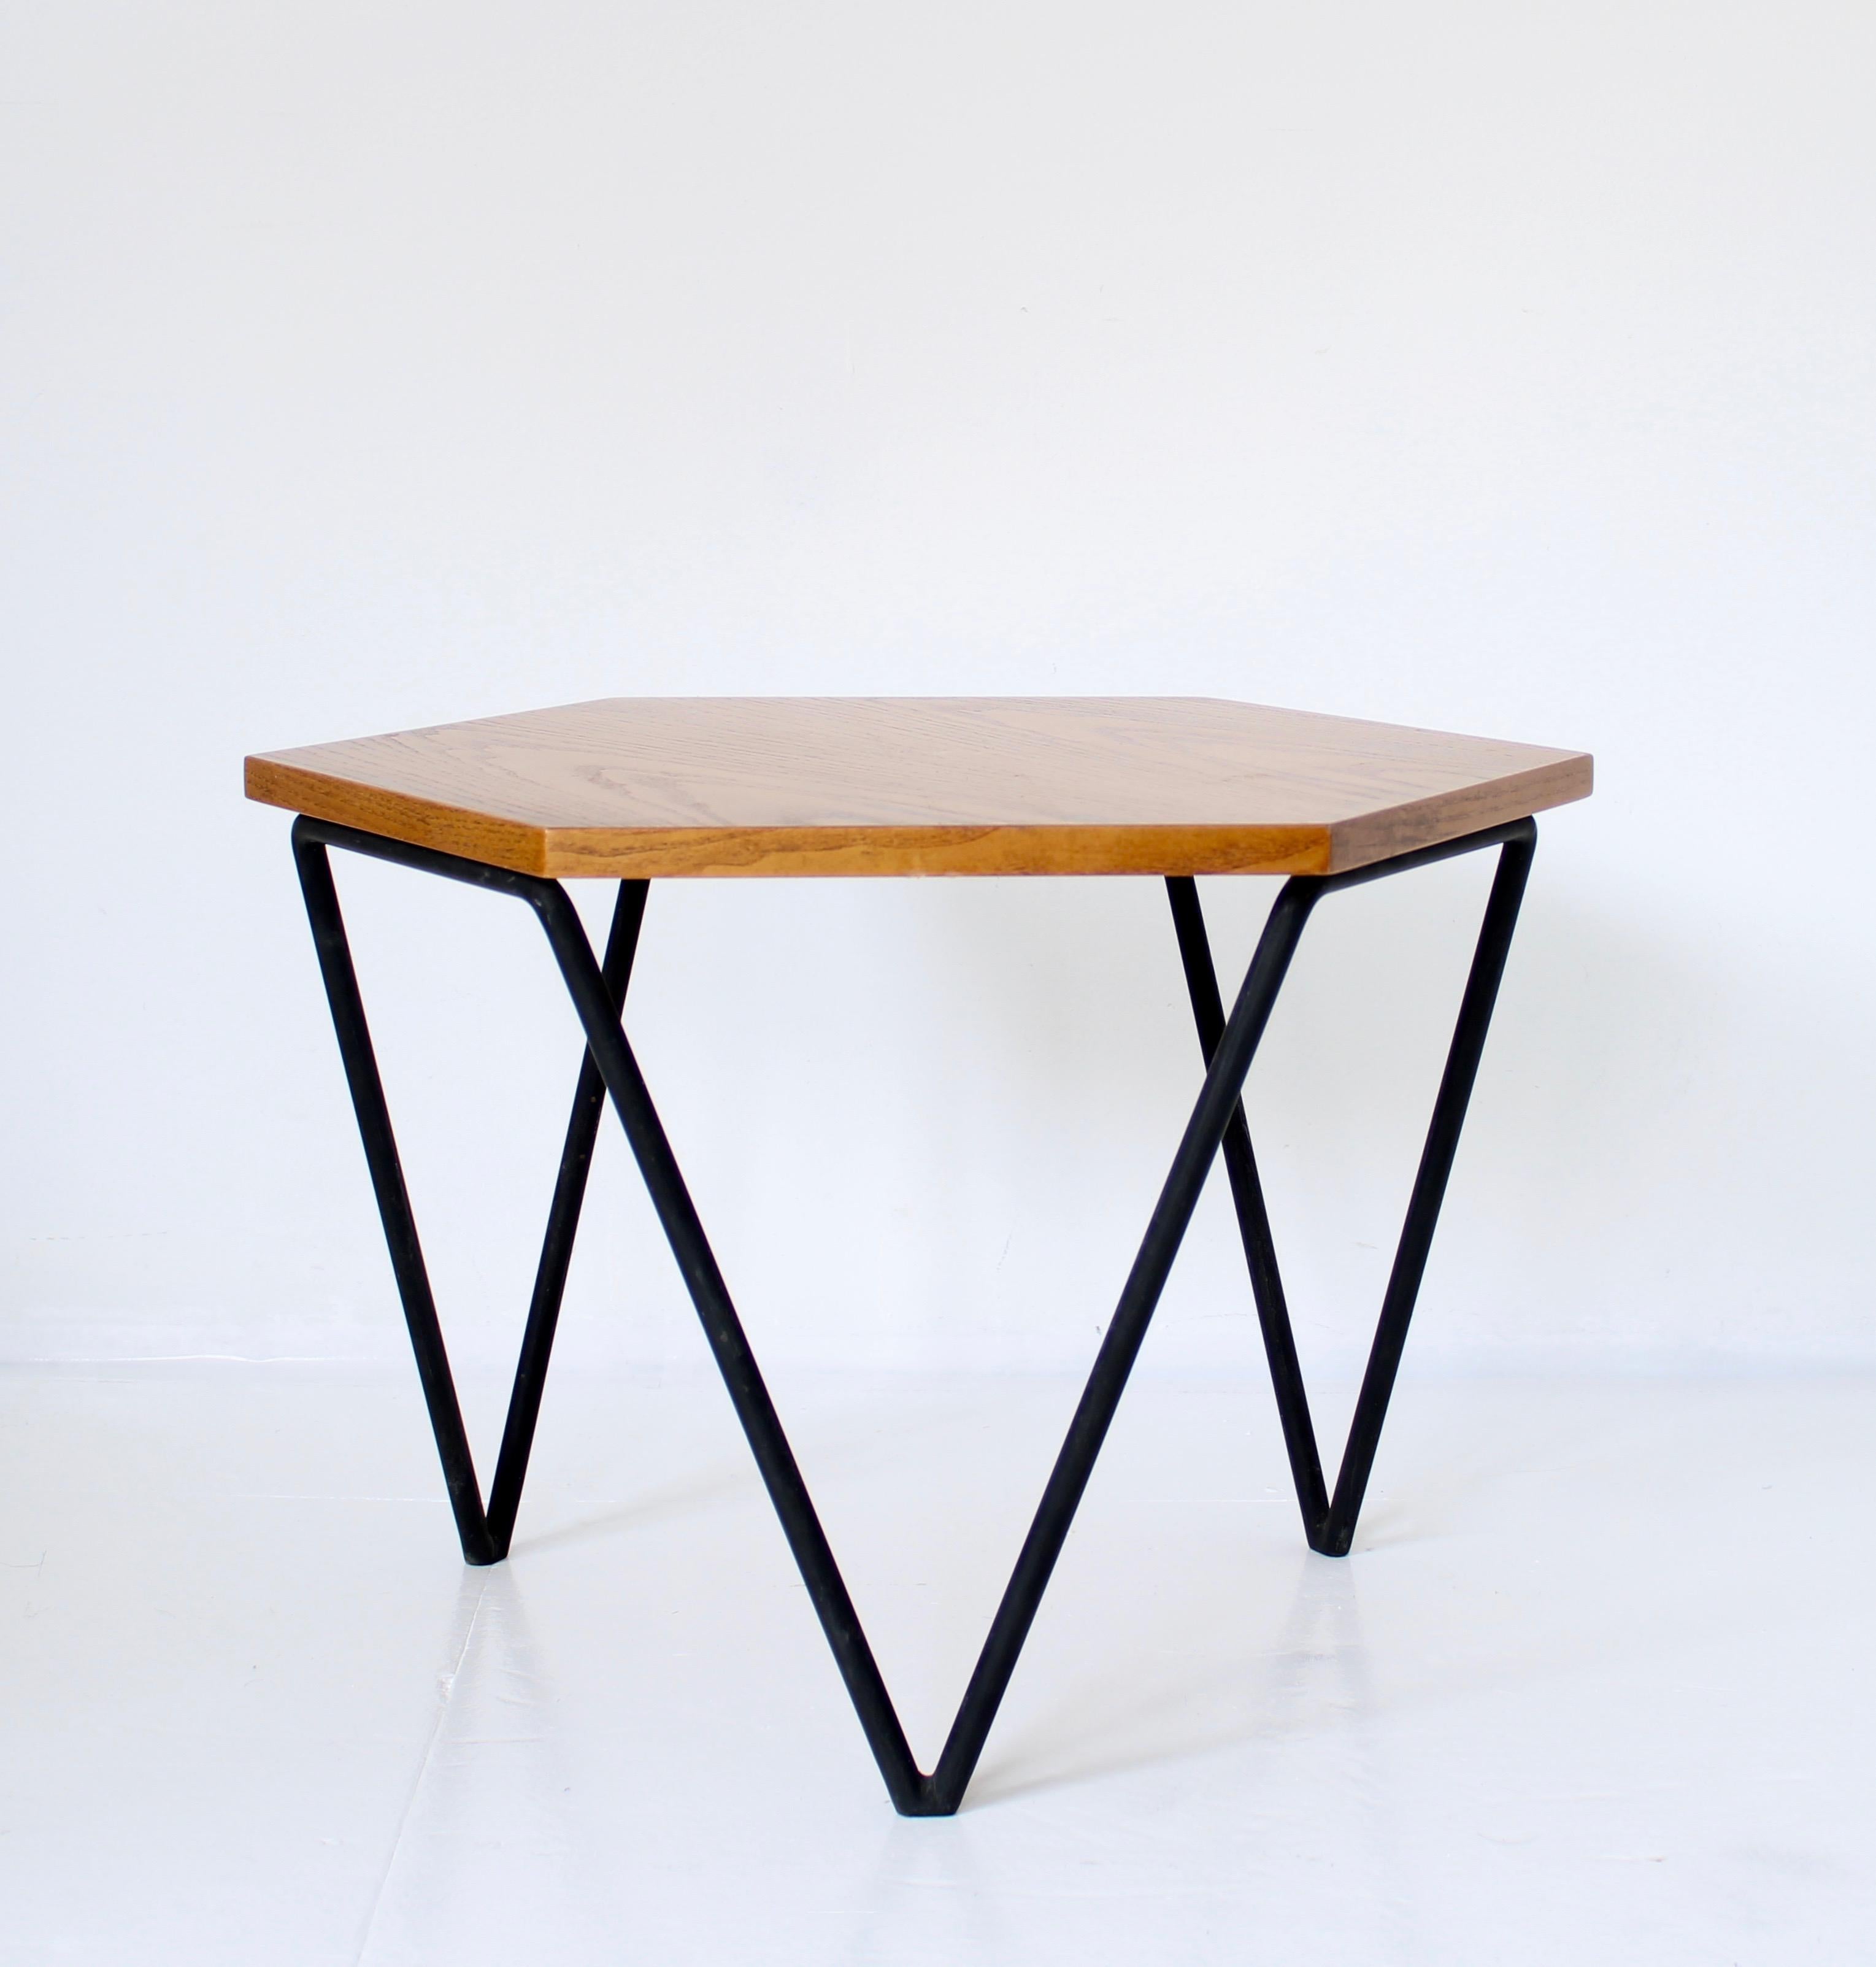 Part of the modular segmented coffee table designed by Gio Ponti produced by I.S.A. Italia which had 7 identical tables either made of wood or white laminate.
Each had a honeycomb shape and three triangular legs.
The metal base has their original